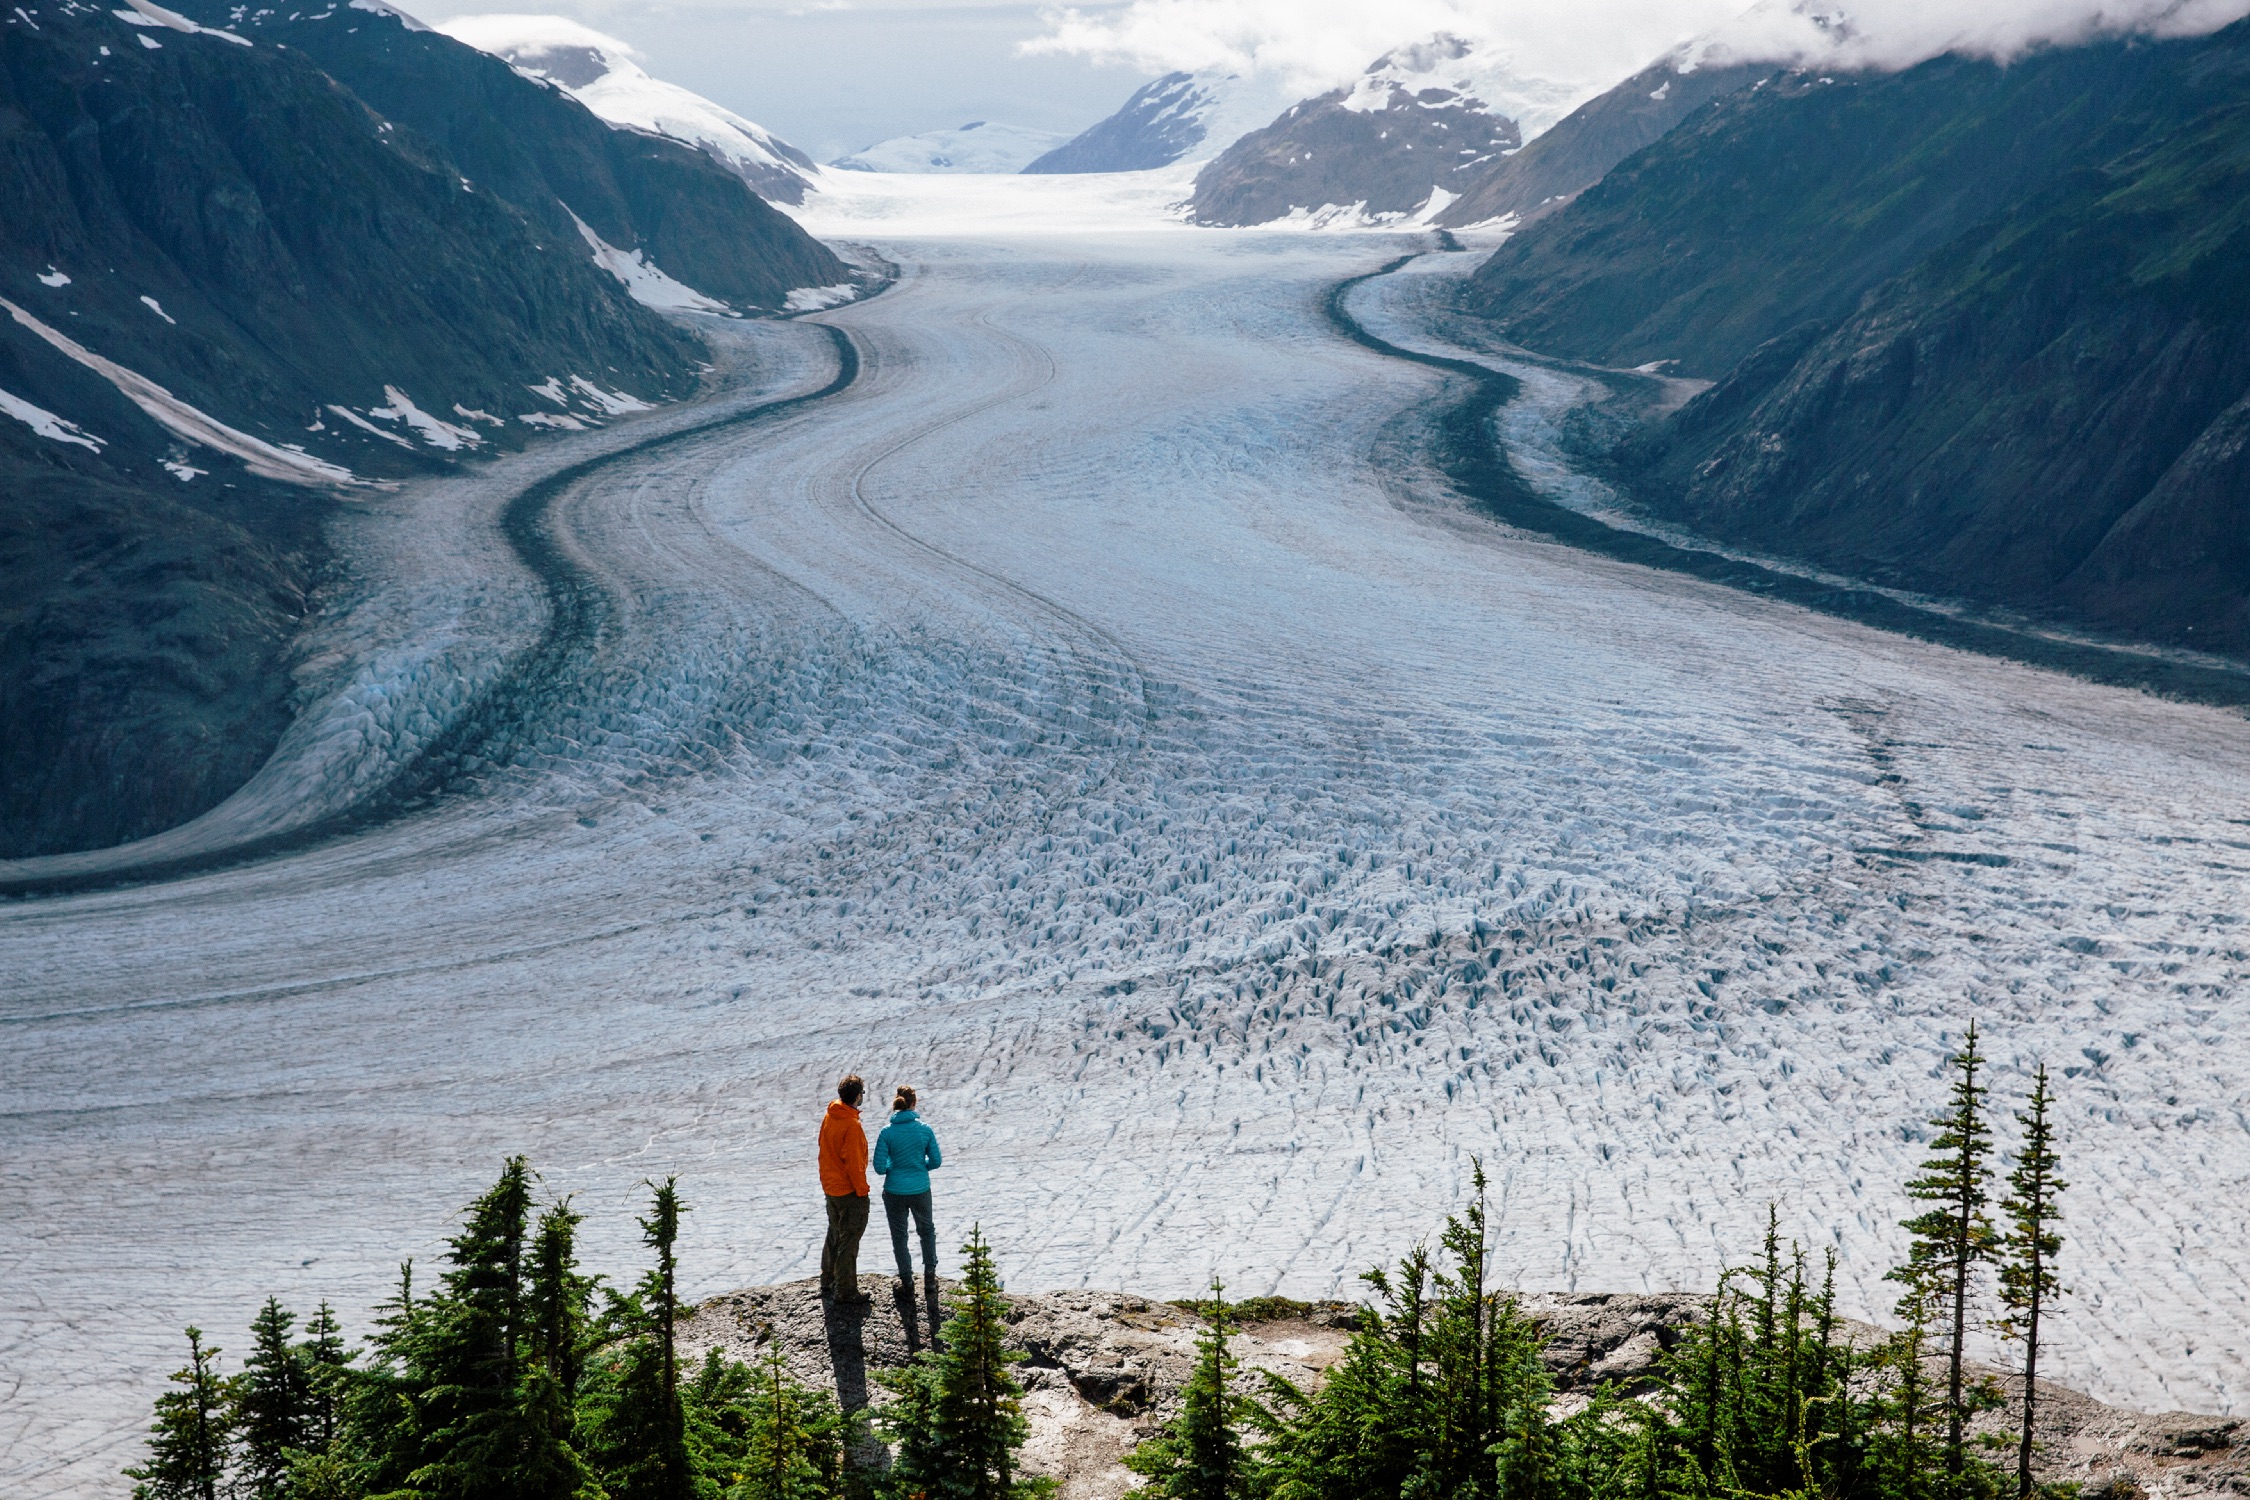 Two people look out at a frozen landscape in the Stewart-Cassiar region of northern BC. They stand on a rocky outcrop and are looking towards the mountain range.